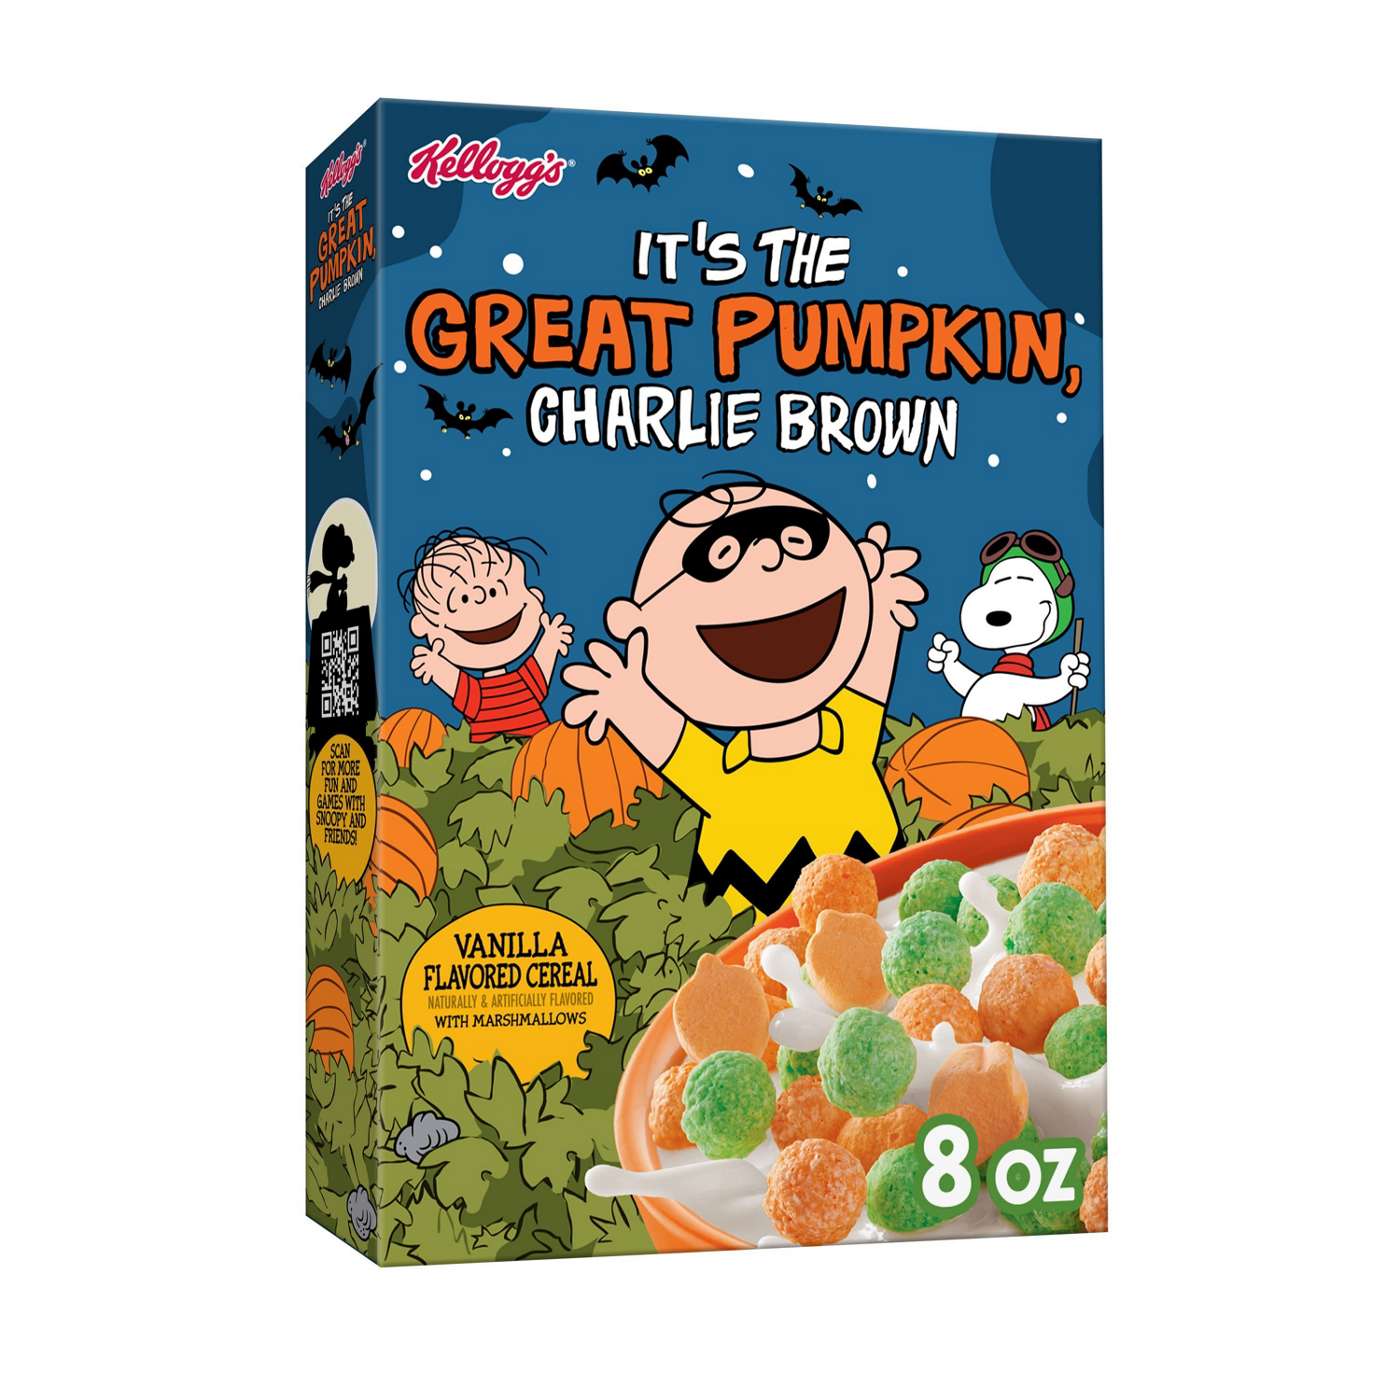 Kellogg's It's The Great Pumpkin Charlie Brown Vanilla Flavored Cereal; image 1 of 3